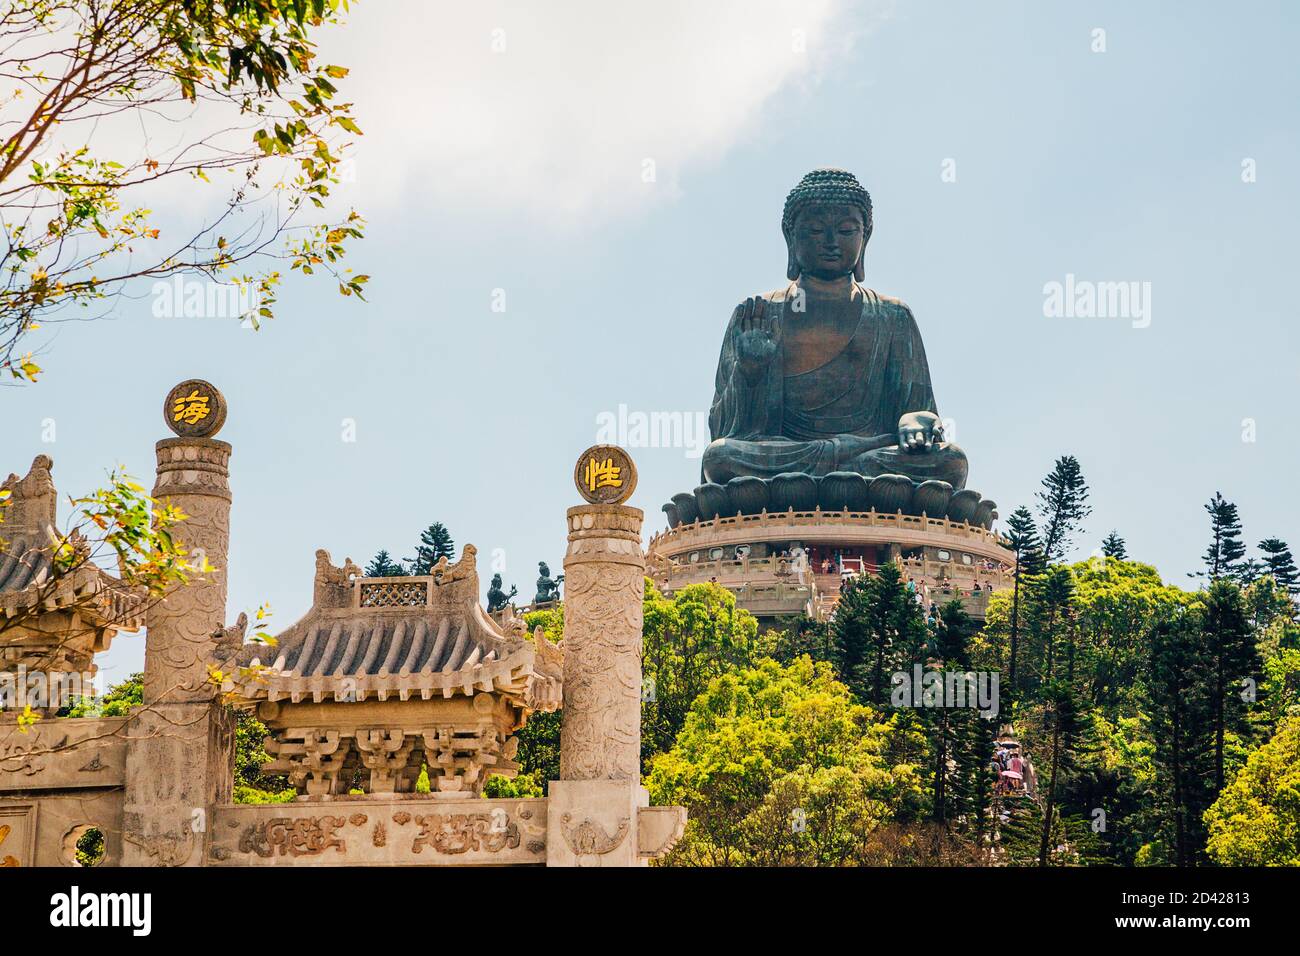 Low angle shot of the world's tallest outdoor seated bronze Buddha located in Nong ping, Hong Kong Stock Photo